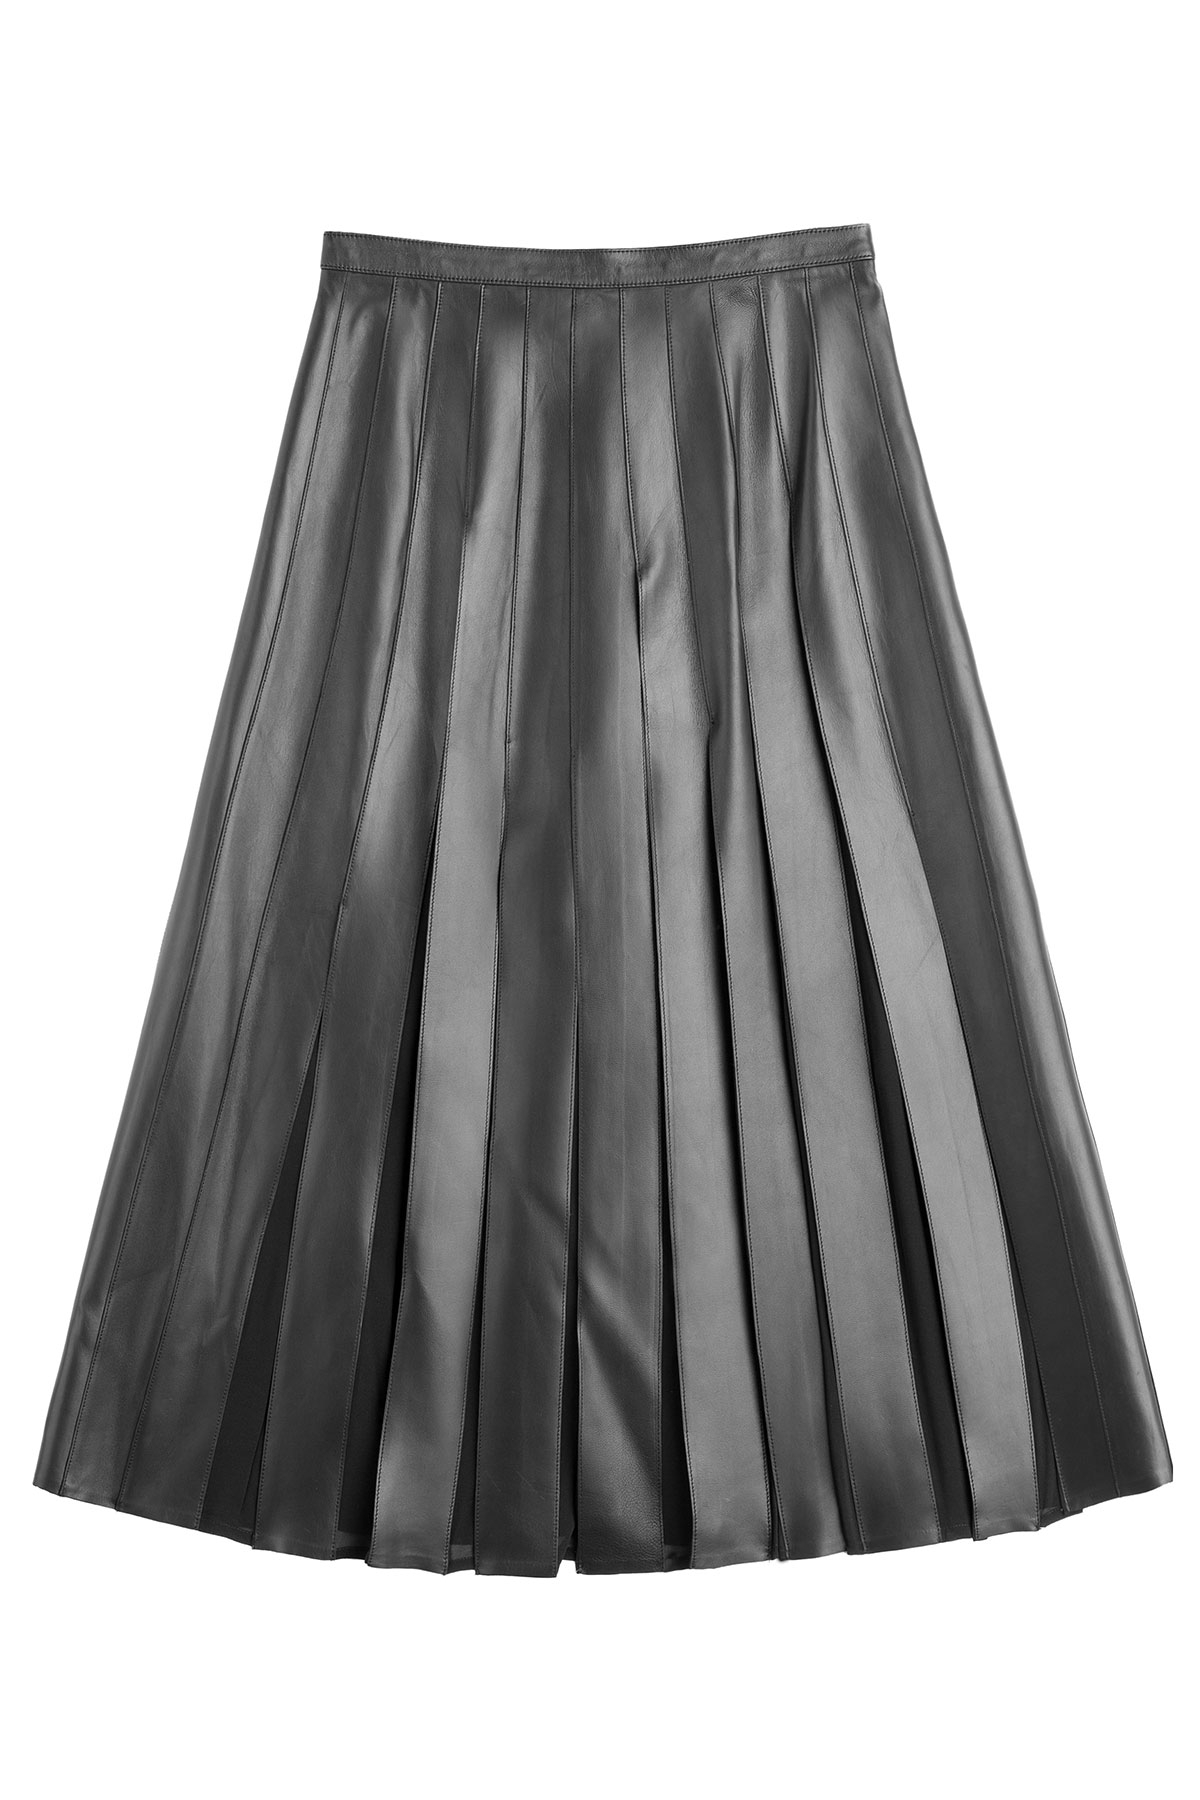 Lyst - Burberry Pleated Leather Skirt - Black in Black